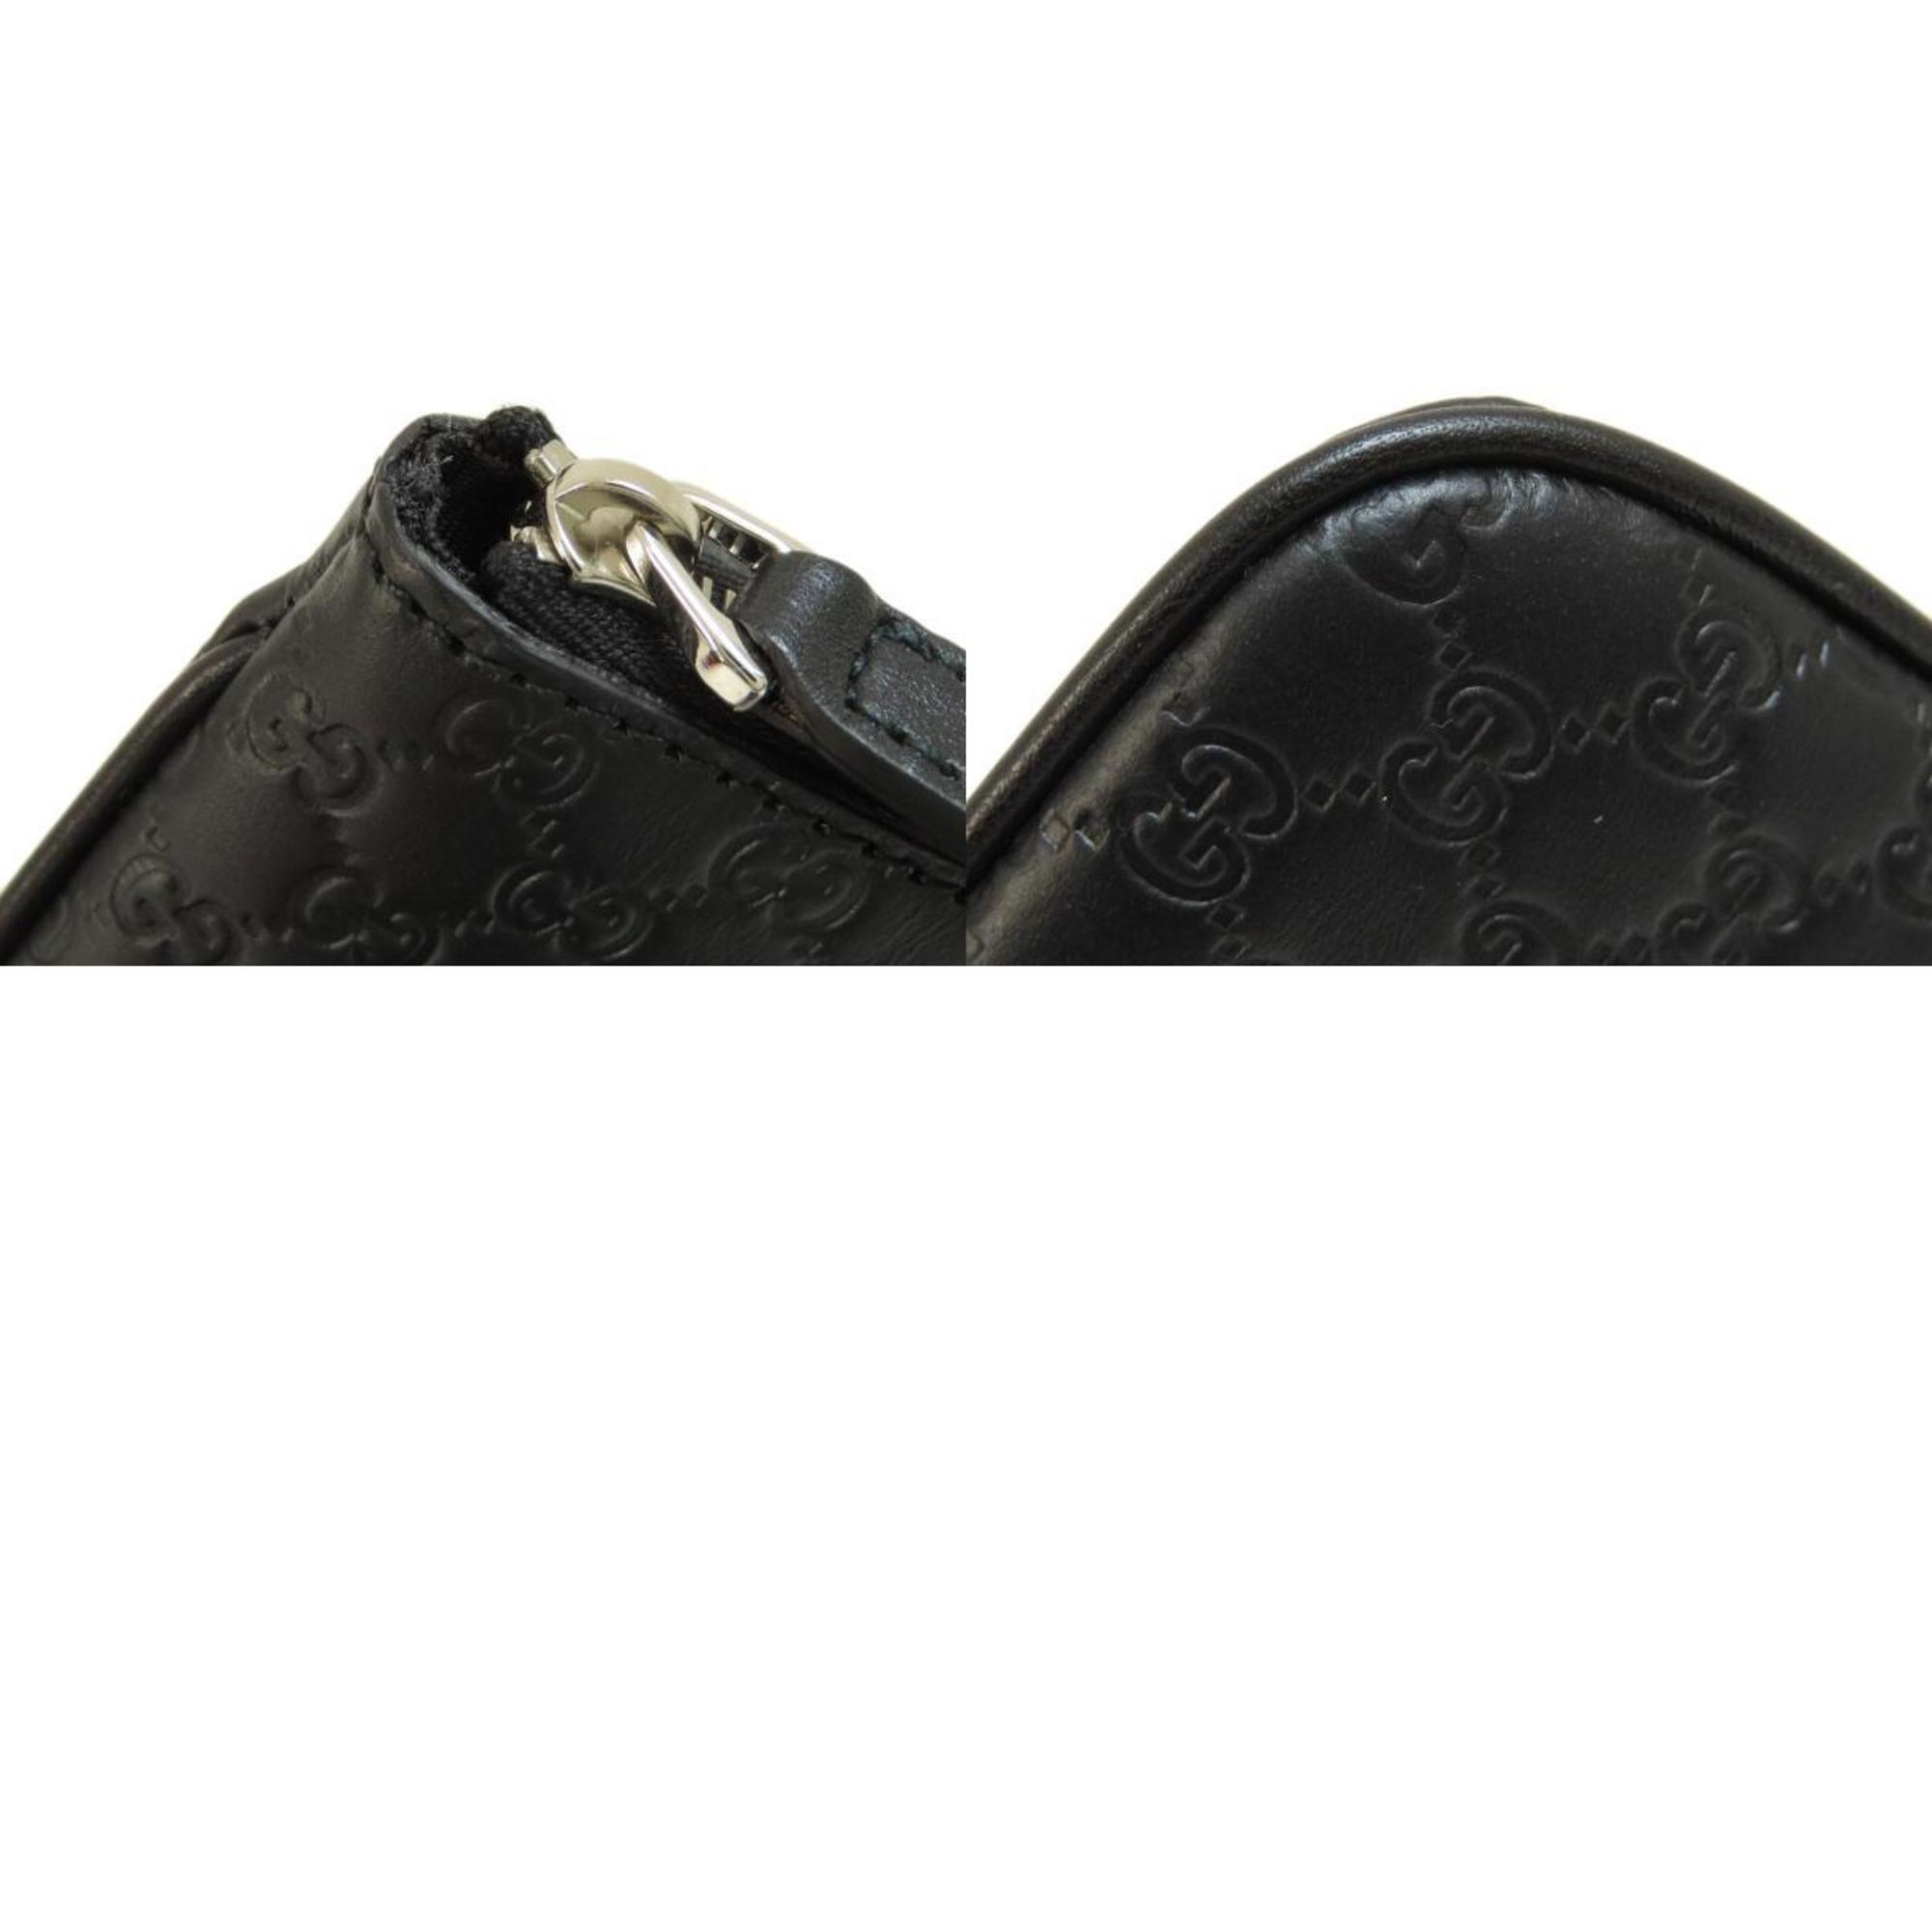 Gucci 54476 Micro GG Outlet Wallet/Coin Case Leather Women's